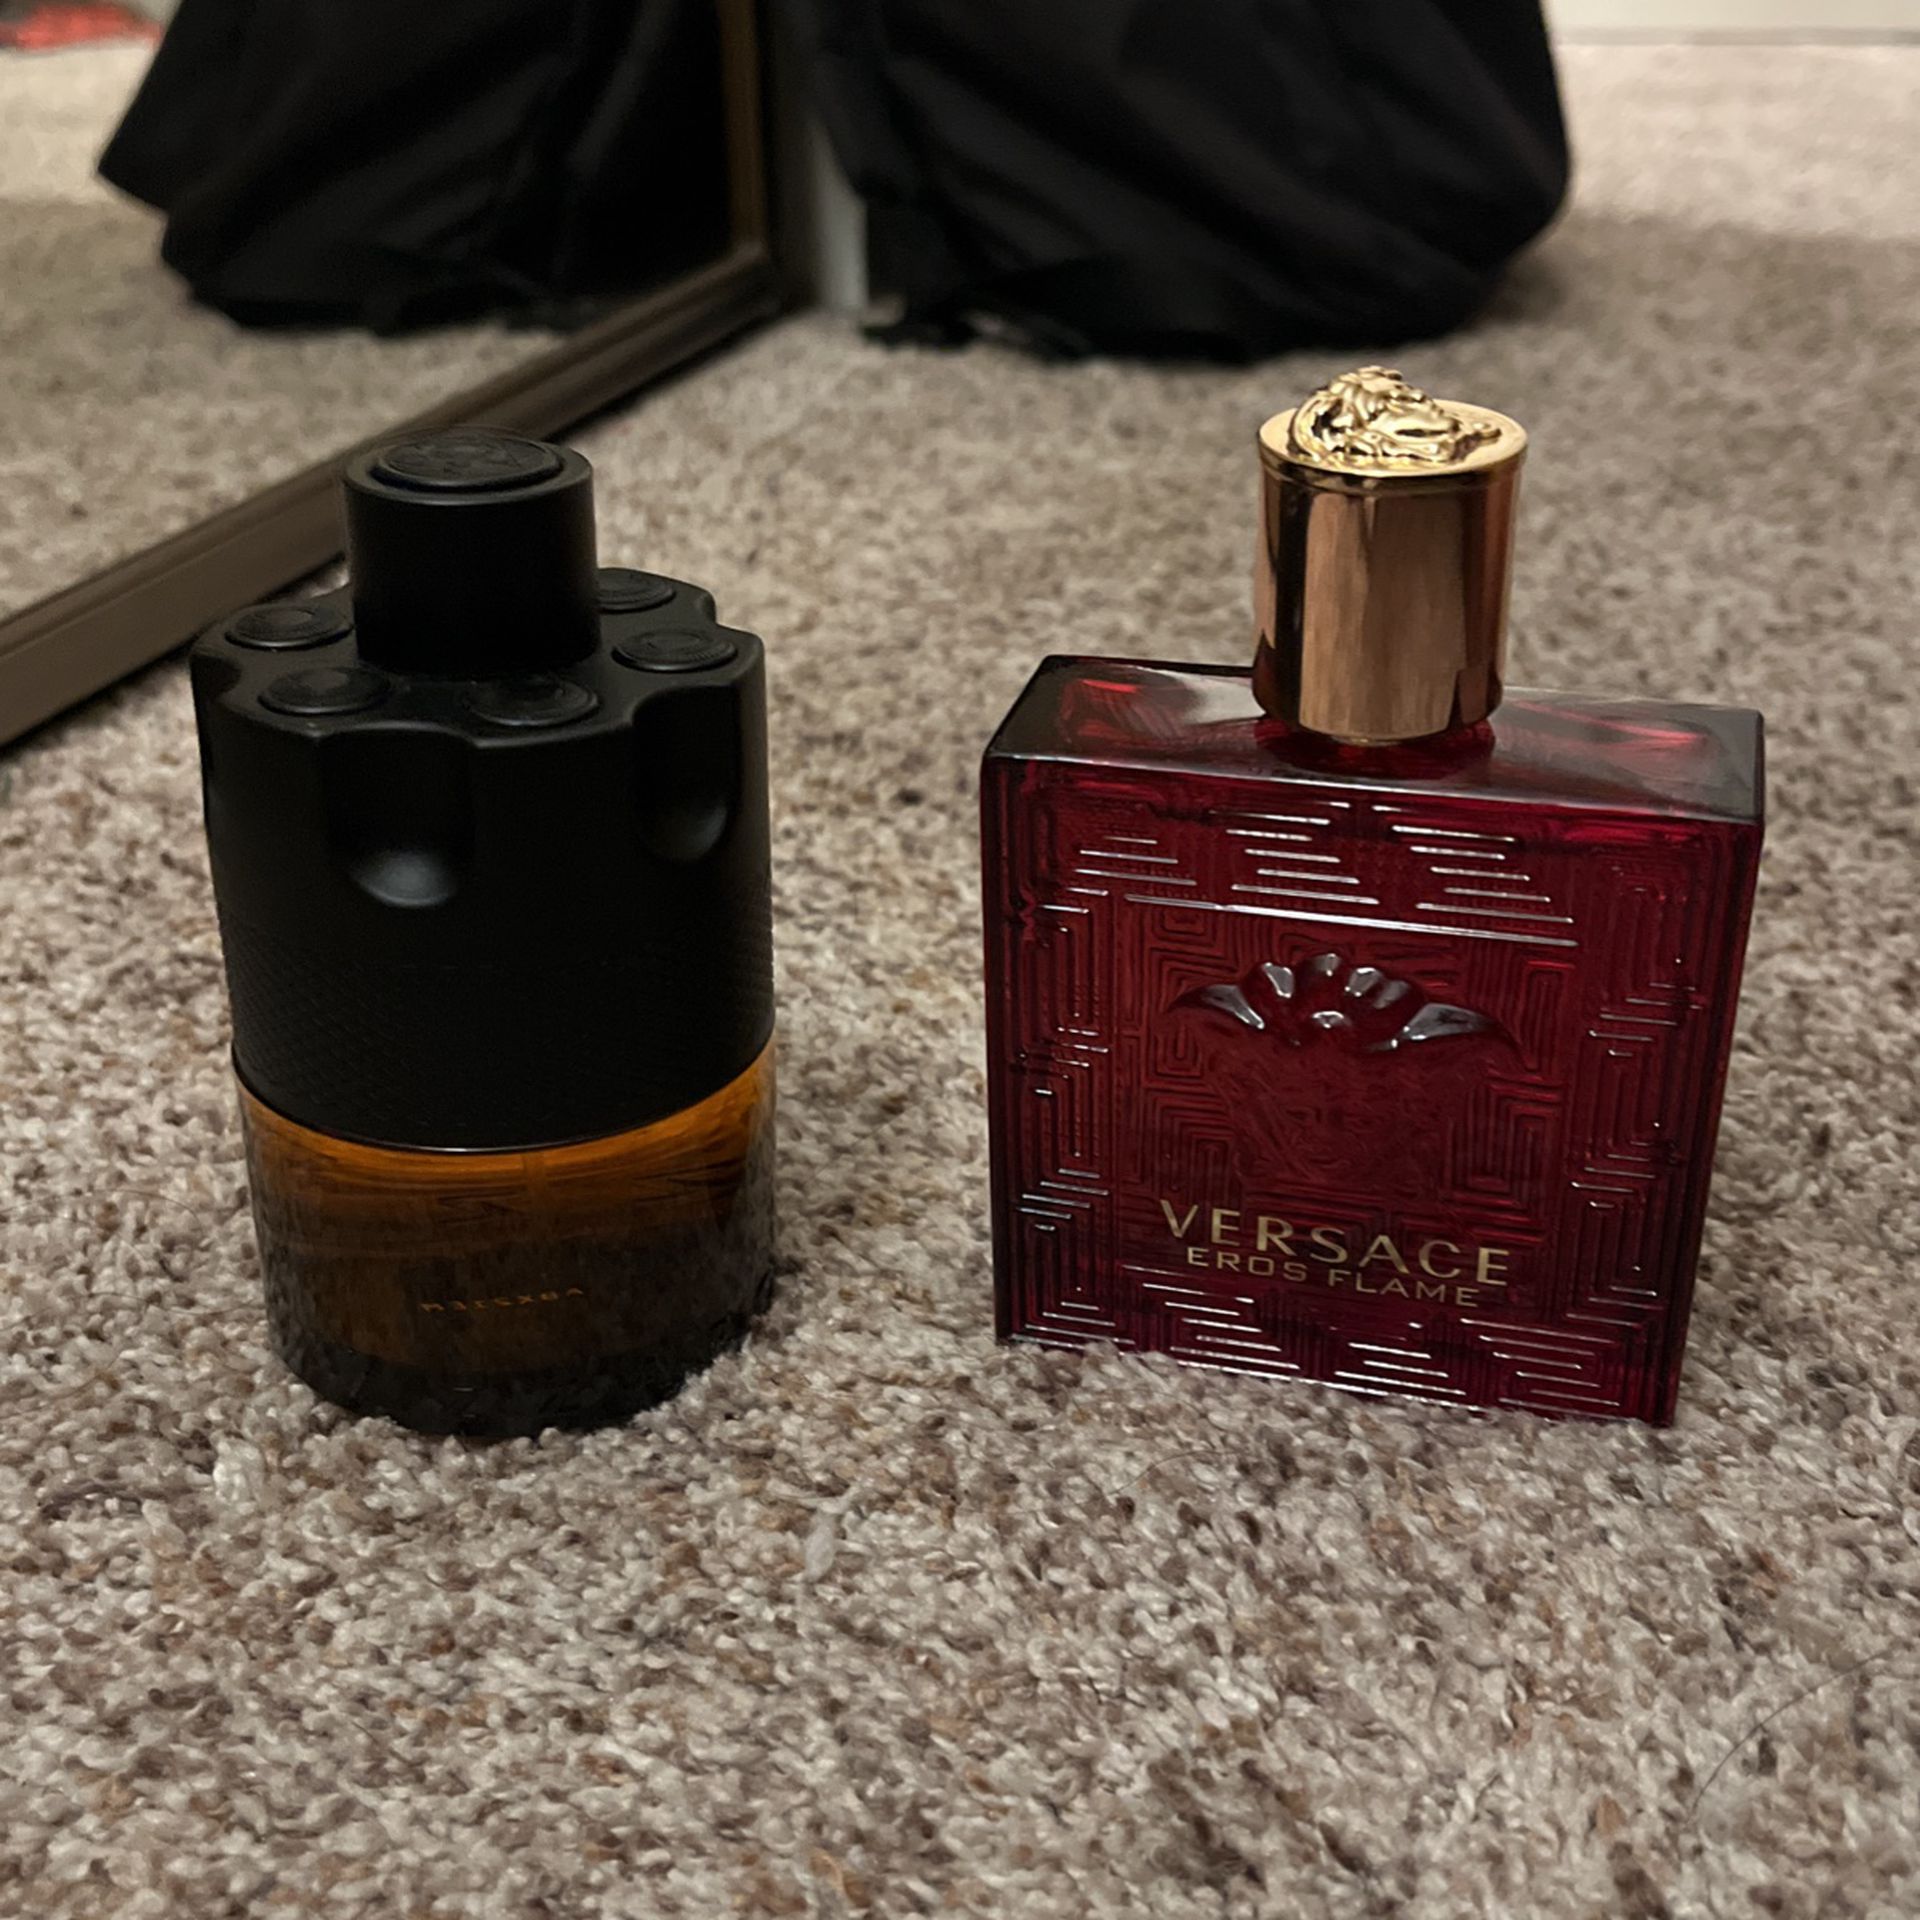 Versachi Eros Flame & Azzaro the most wanted